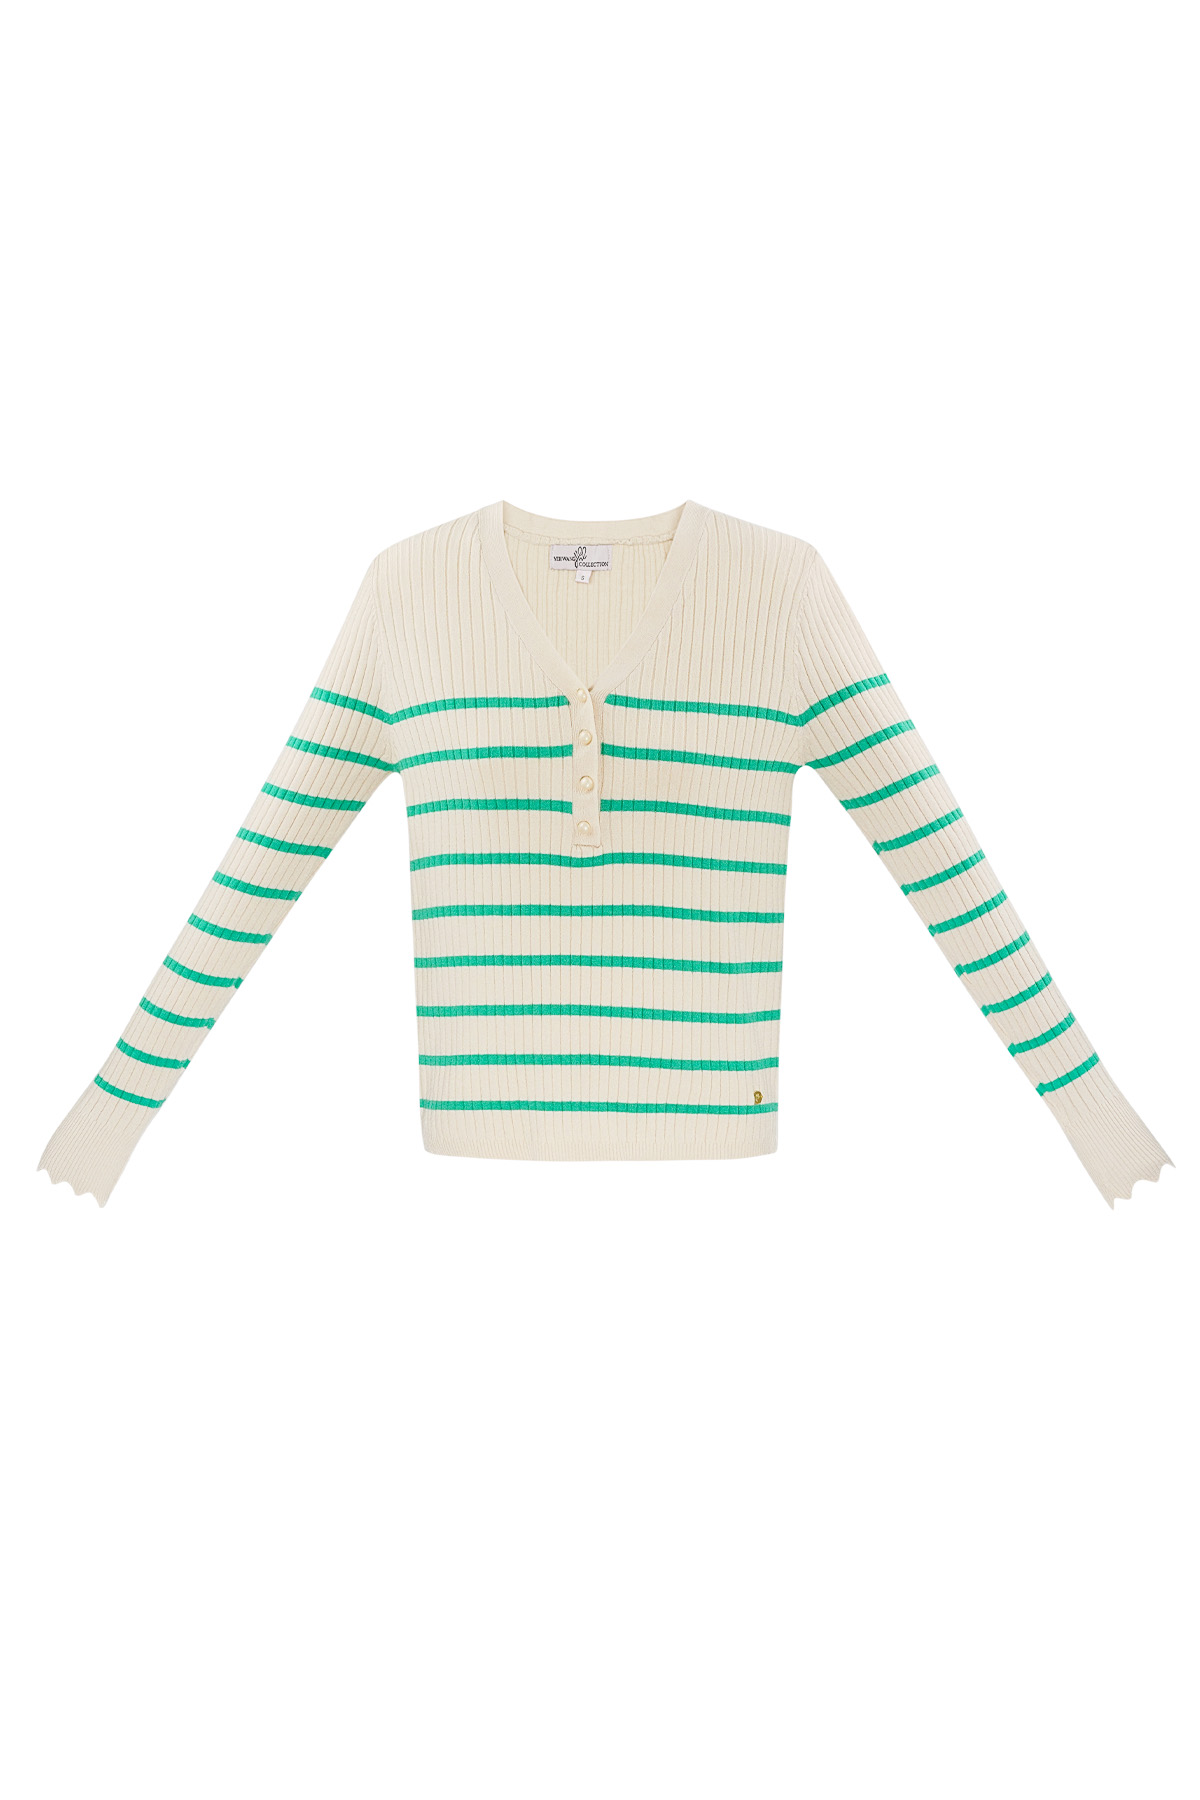 Striped sweater with v-neck - green  h5 